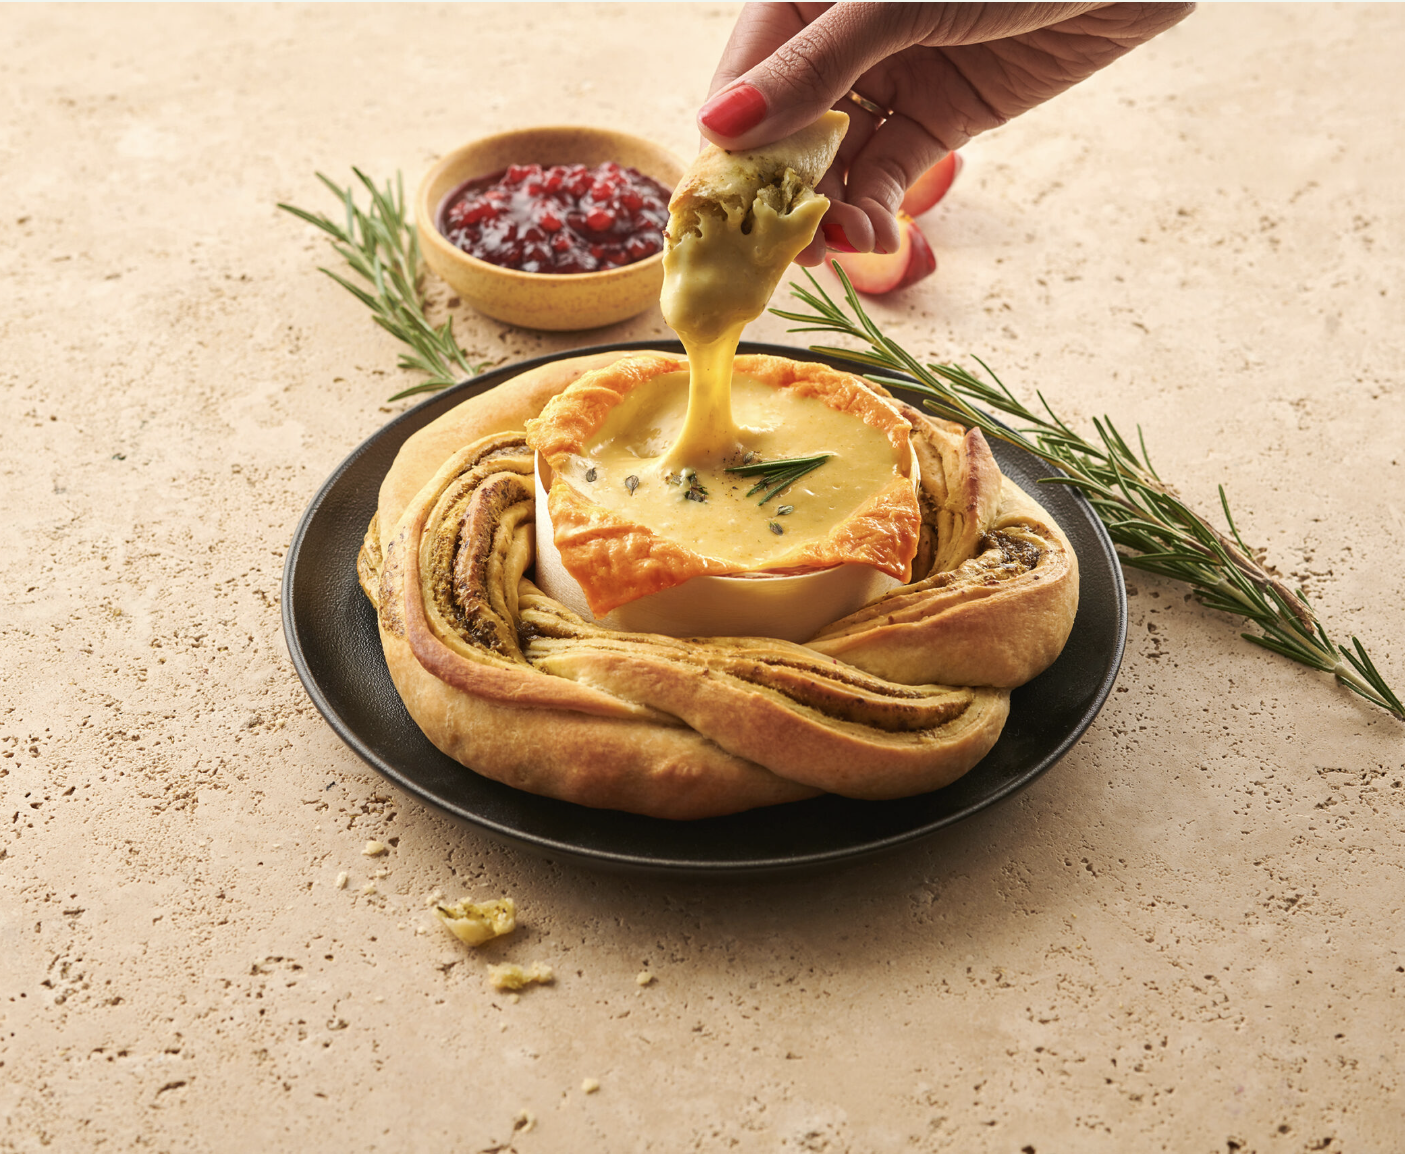 Mondarella Oven Rouge Warm and creamy and straight from the oven. With an extra layer of fine spices that give it its characteristic red color note.
100% plant-based and made from natural ingredients.